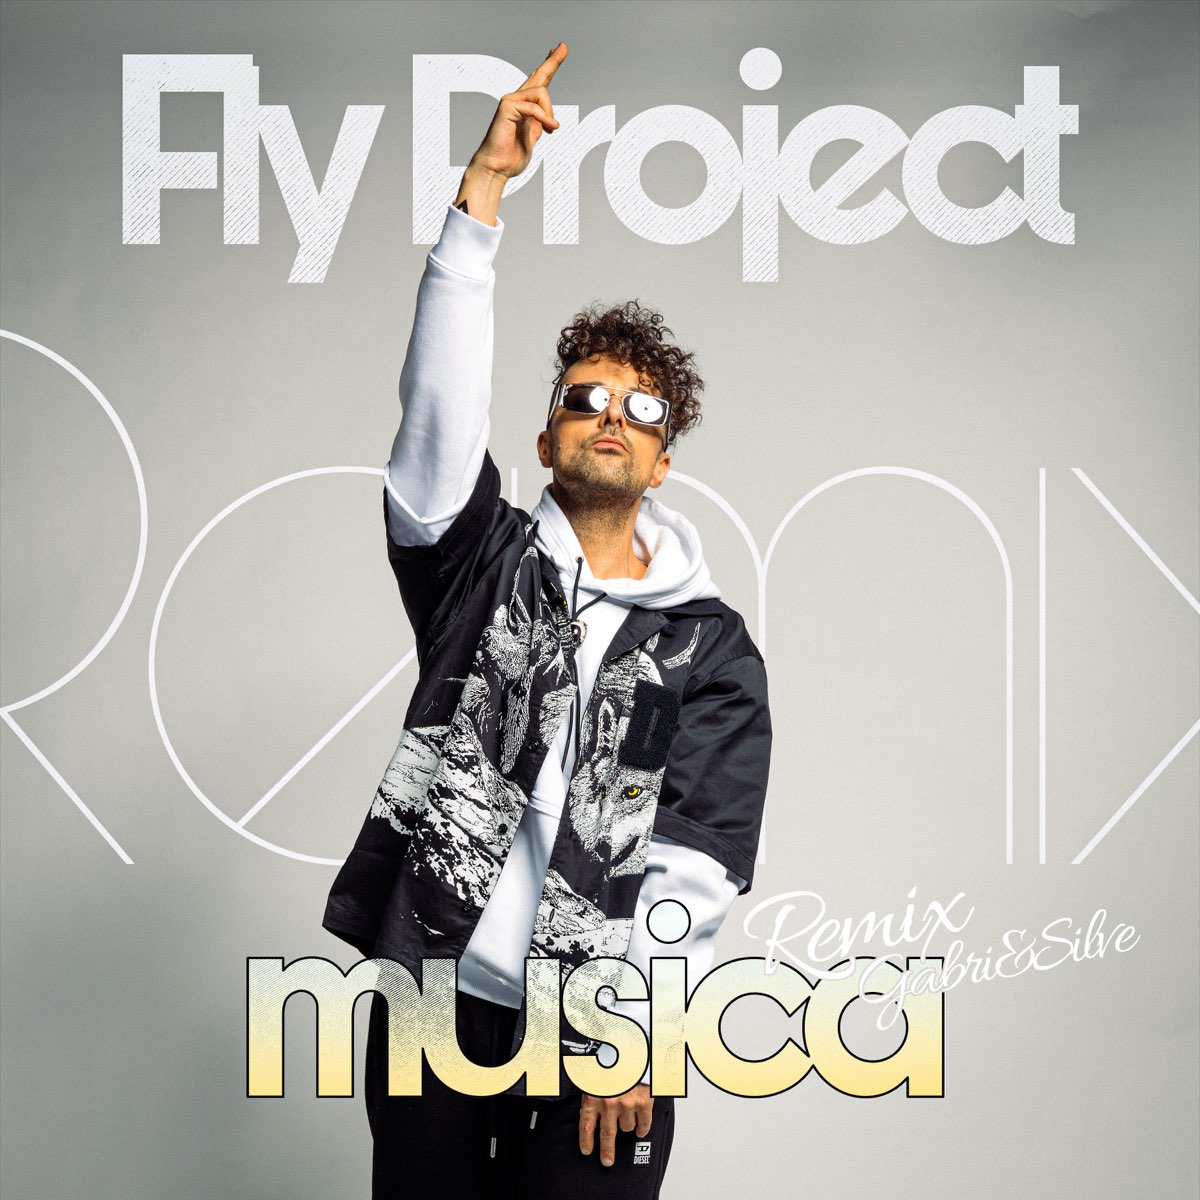 Project musica. Fly Project musica. Fly Project. Fly up Project.